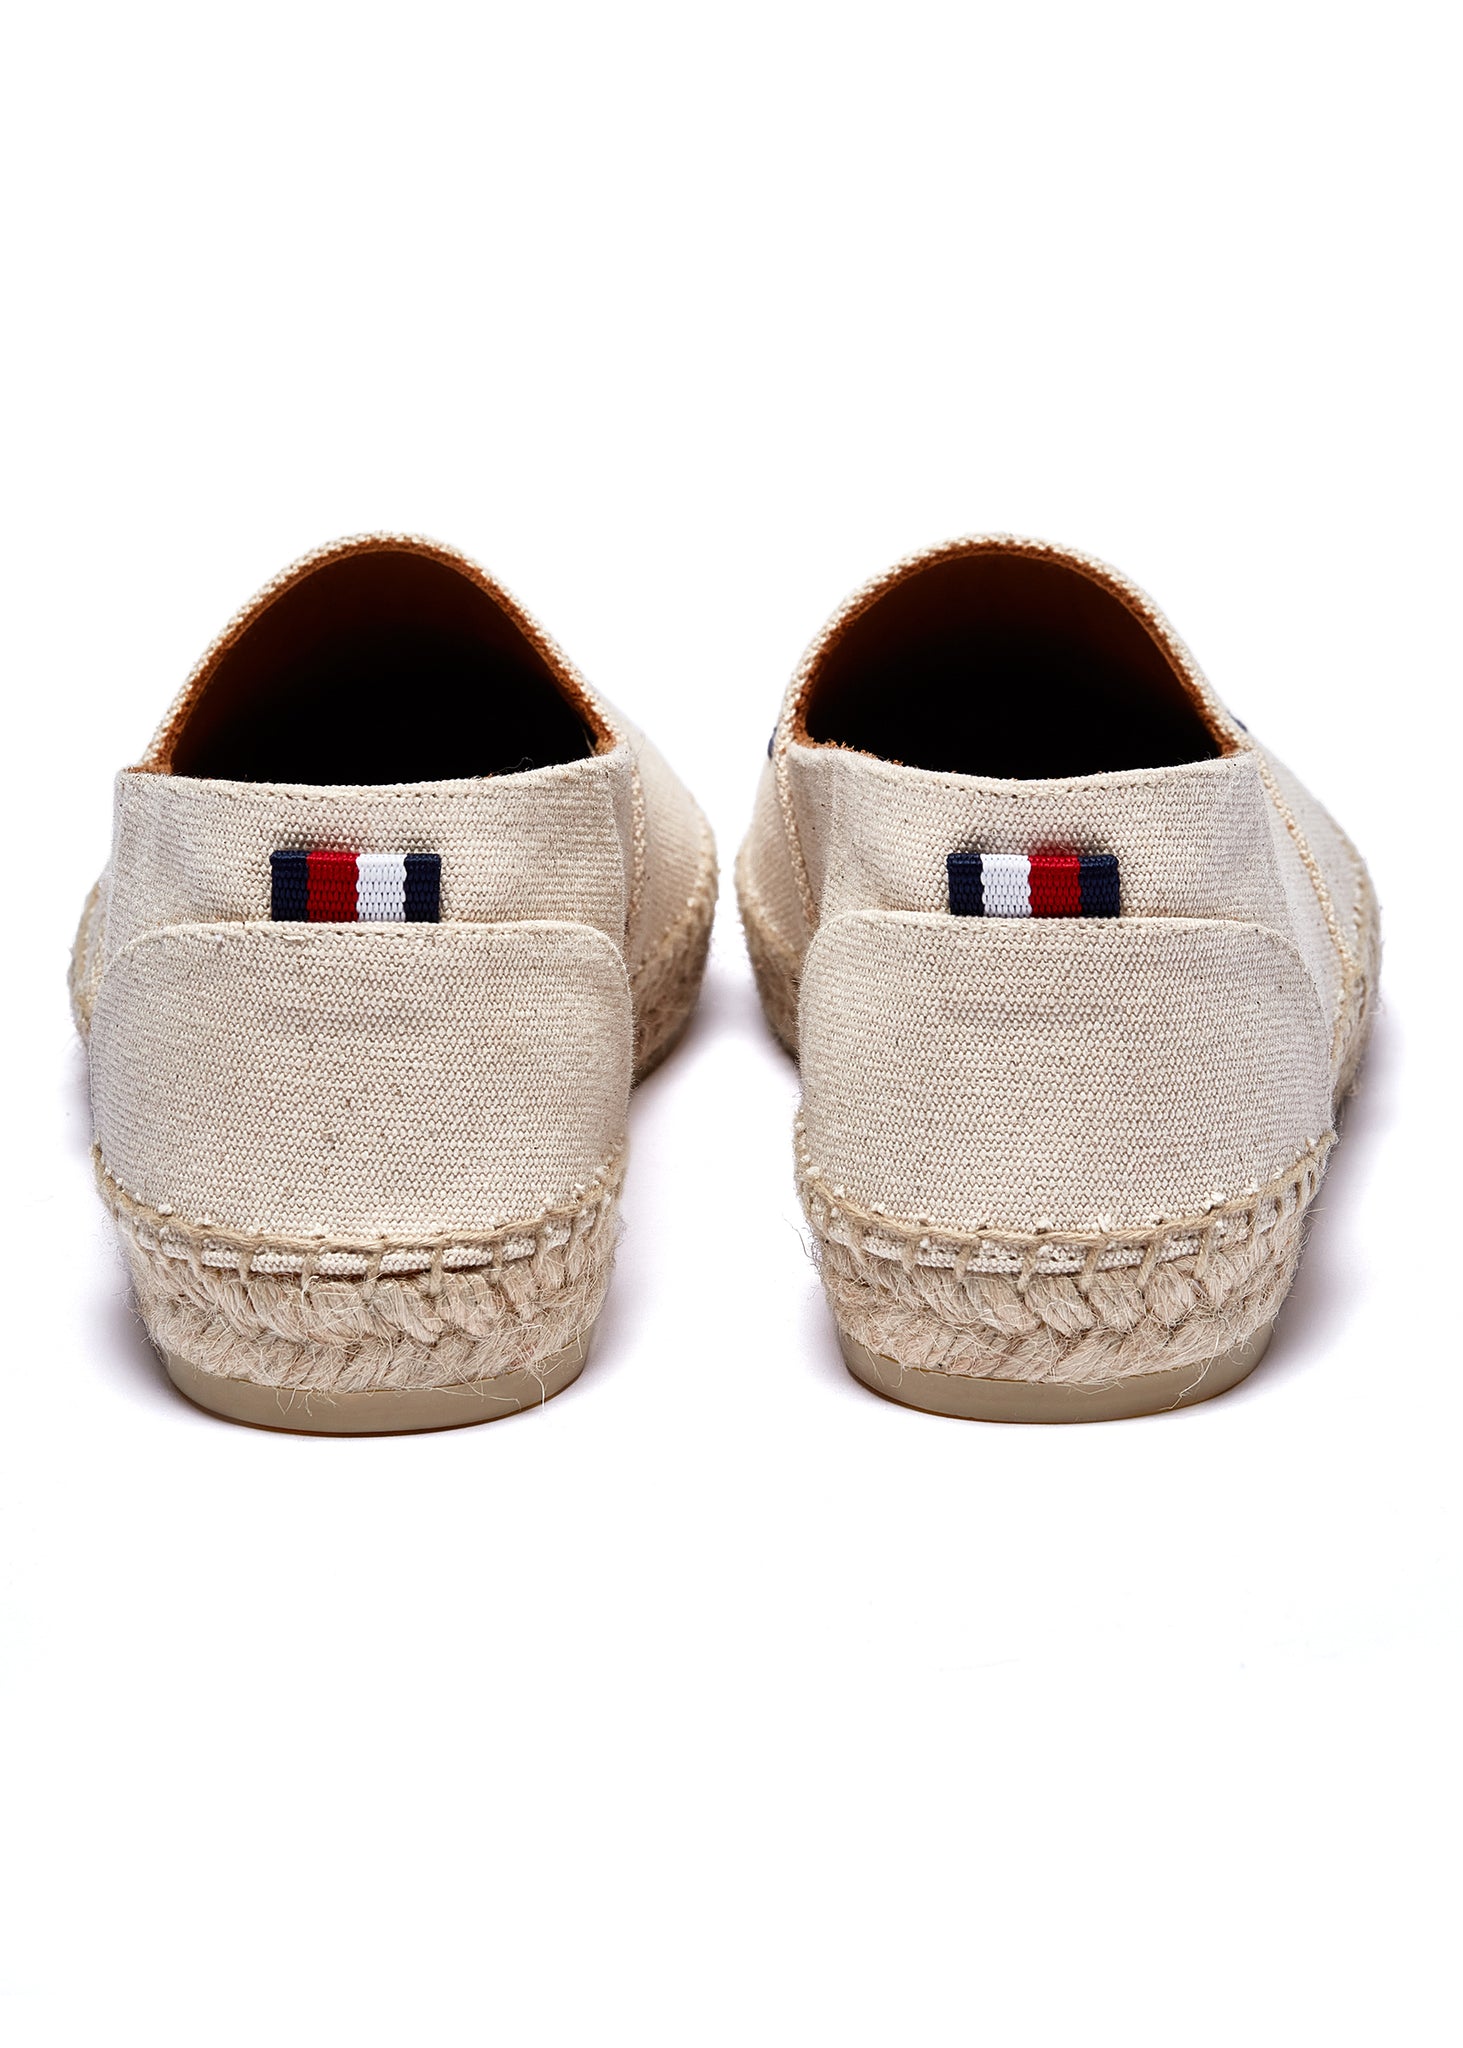 Back of classic style natural canvas espadrille with plaited jute sole and jute toe cap with navy embroidered branding on top and a red, white and blue small tag on the heel